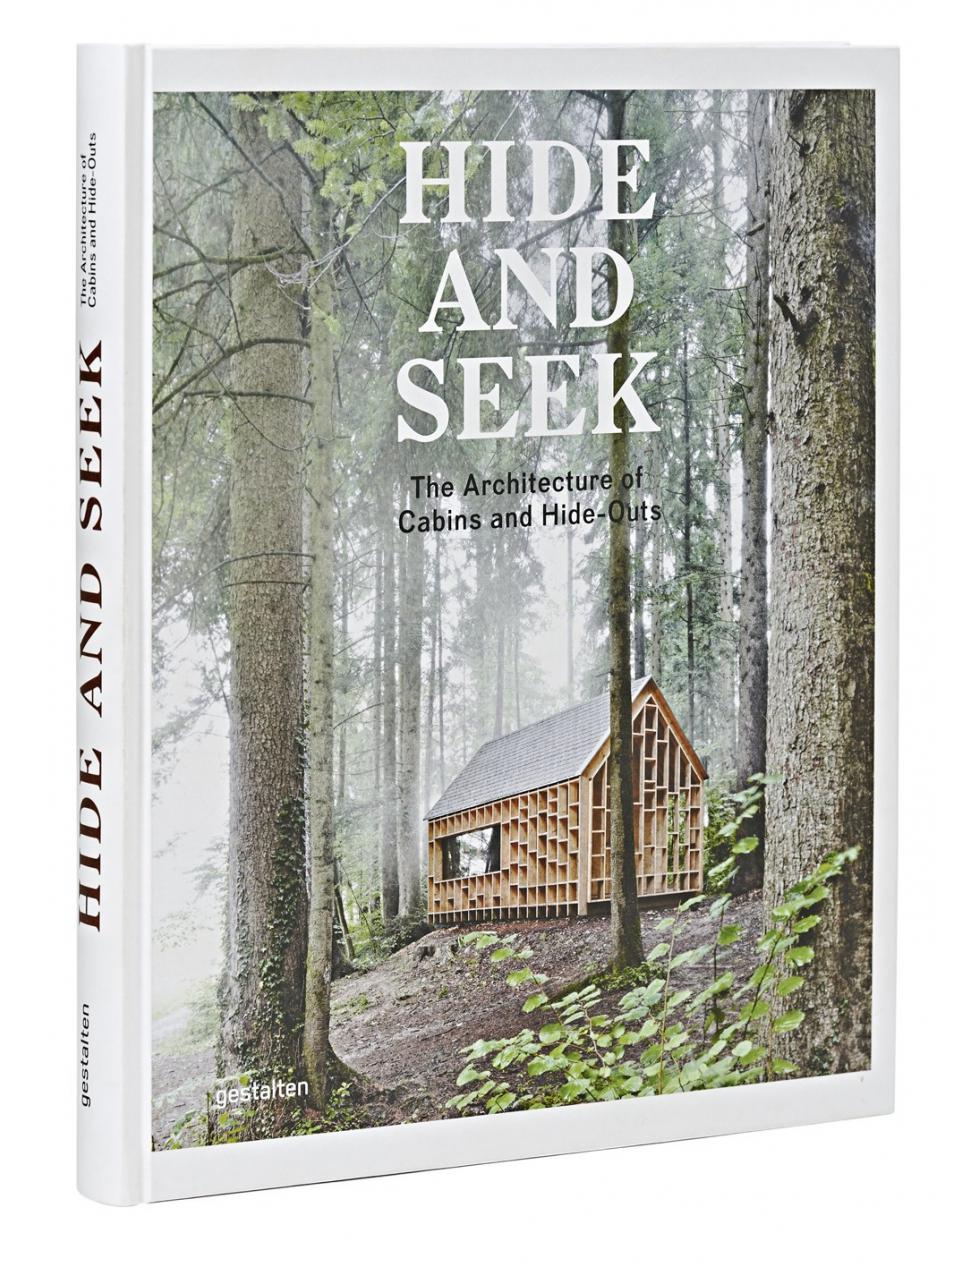 Book: HIDE AND SEEK - The Architecture Of Cabins